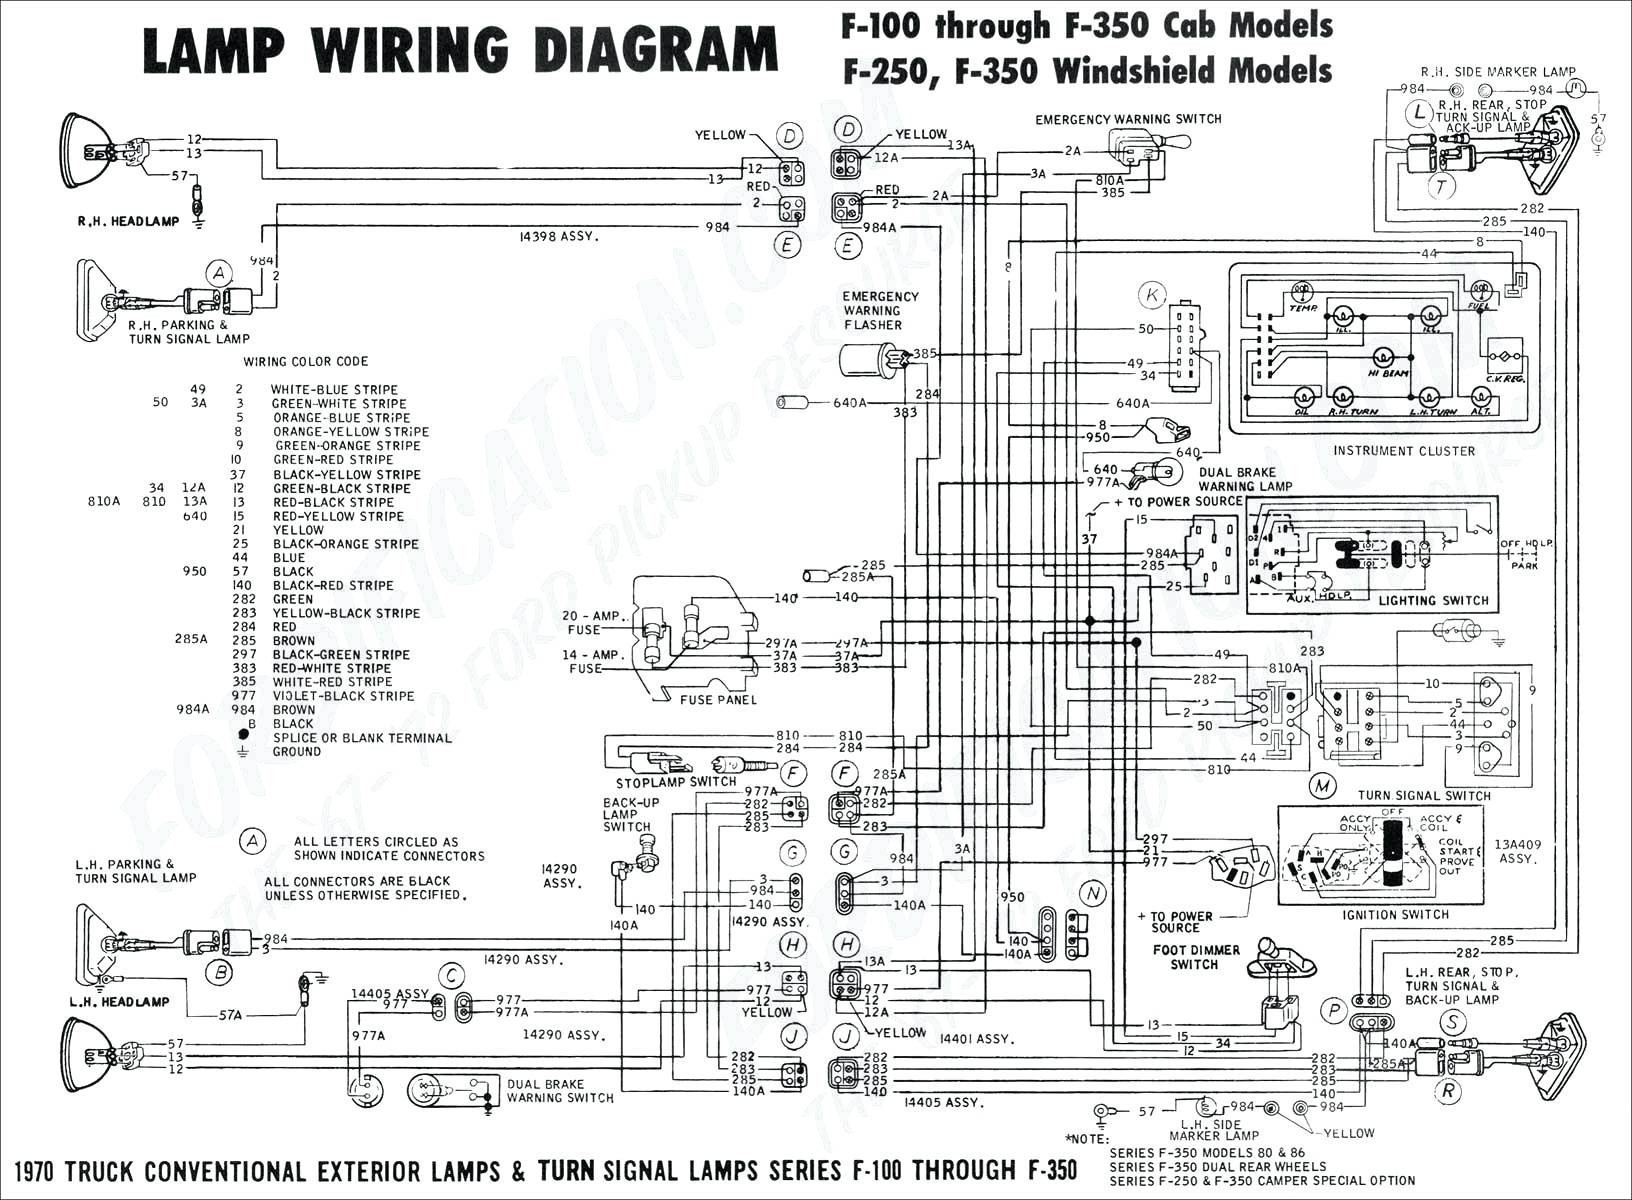 Wiring Diagram Zx6r 1999 top rated 1973 Honda Cb750 Wiring Diagram Moreover 1999 ford F 150 Fuse Box